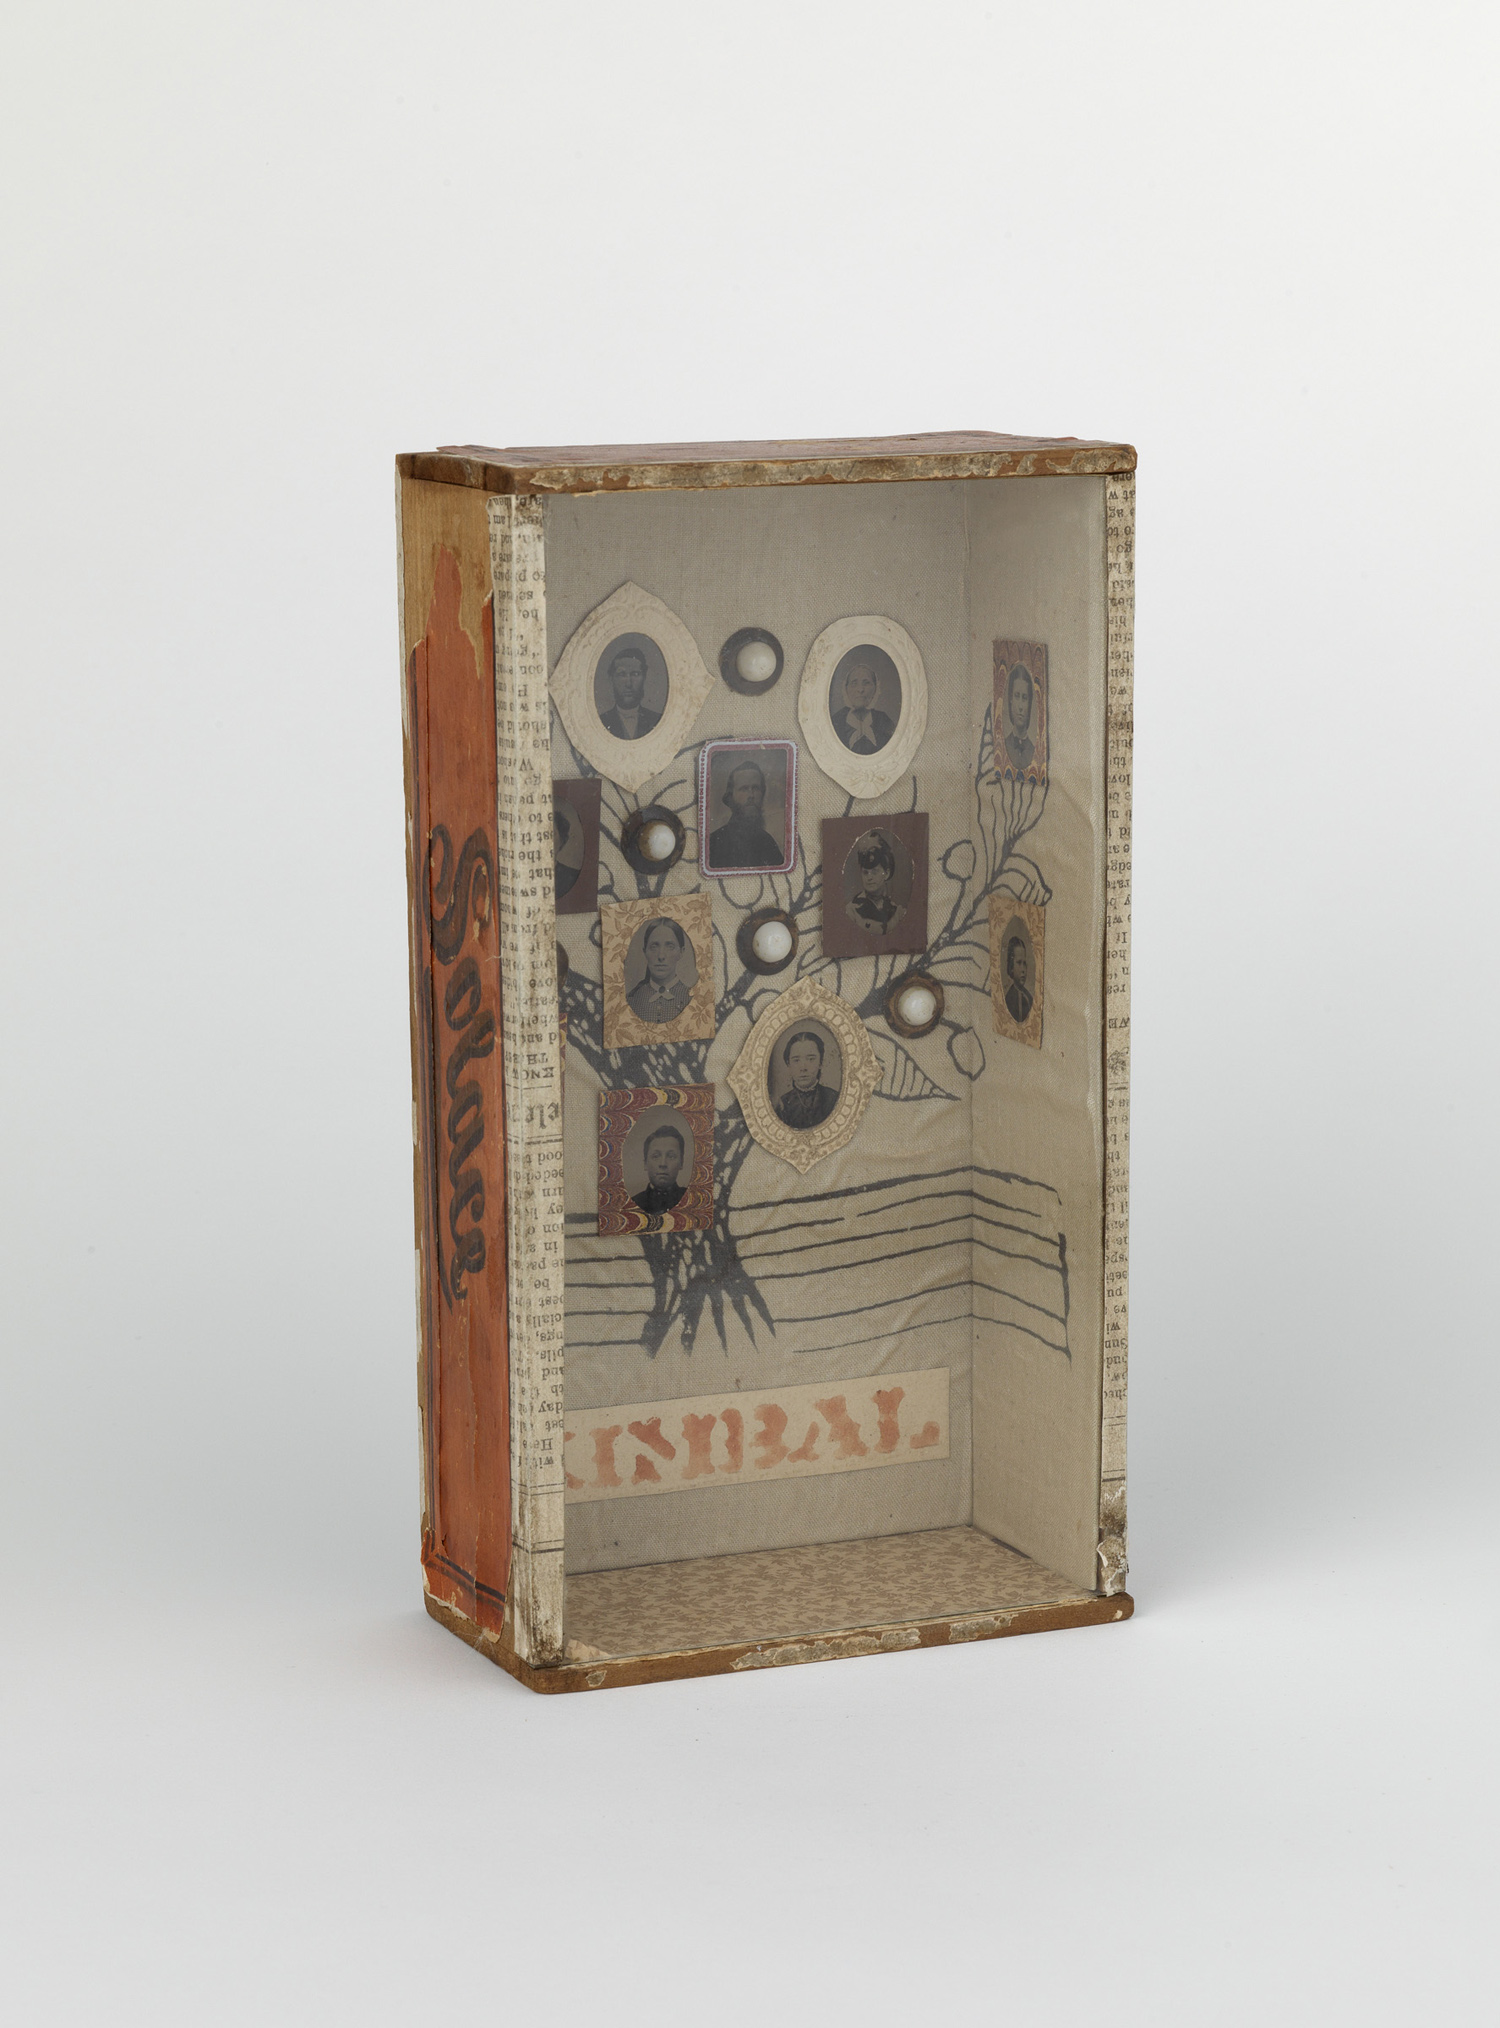    Shadow box with tintypes of the Kimball Family set against contemporary batik fabric.&nbsp; 1880s-1990s   